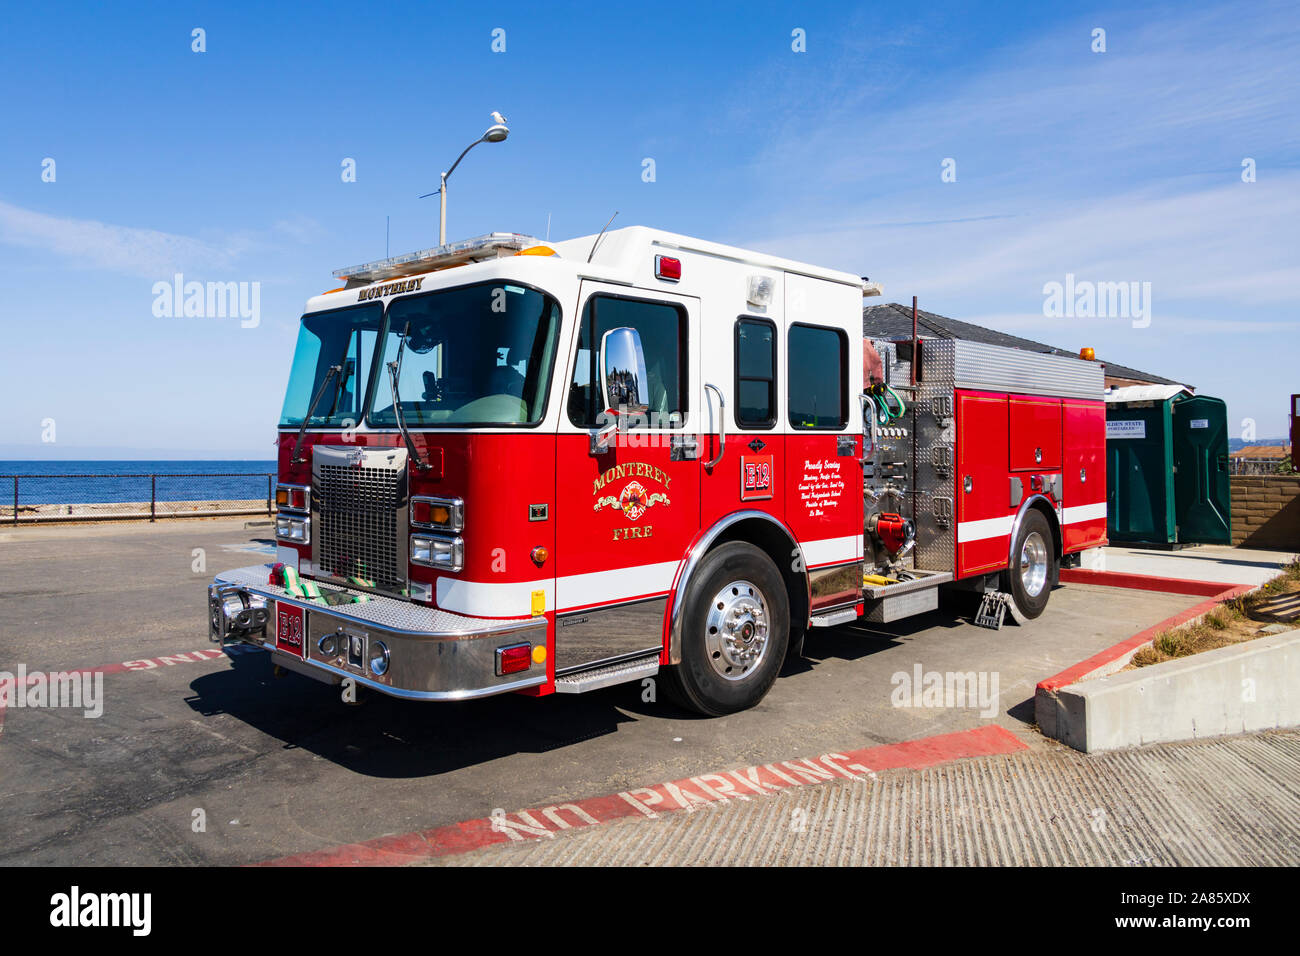 Fire engine of the Monterey Fire Department on the Coast Guard pier, Monterey, California, United States of America. Stock Photo